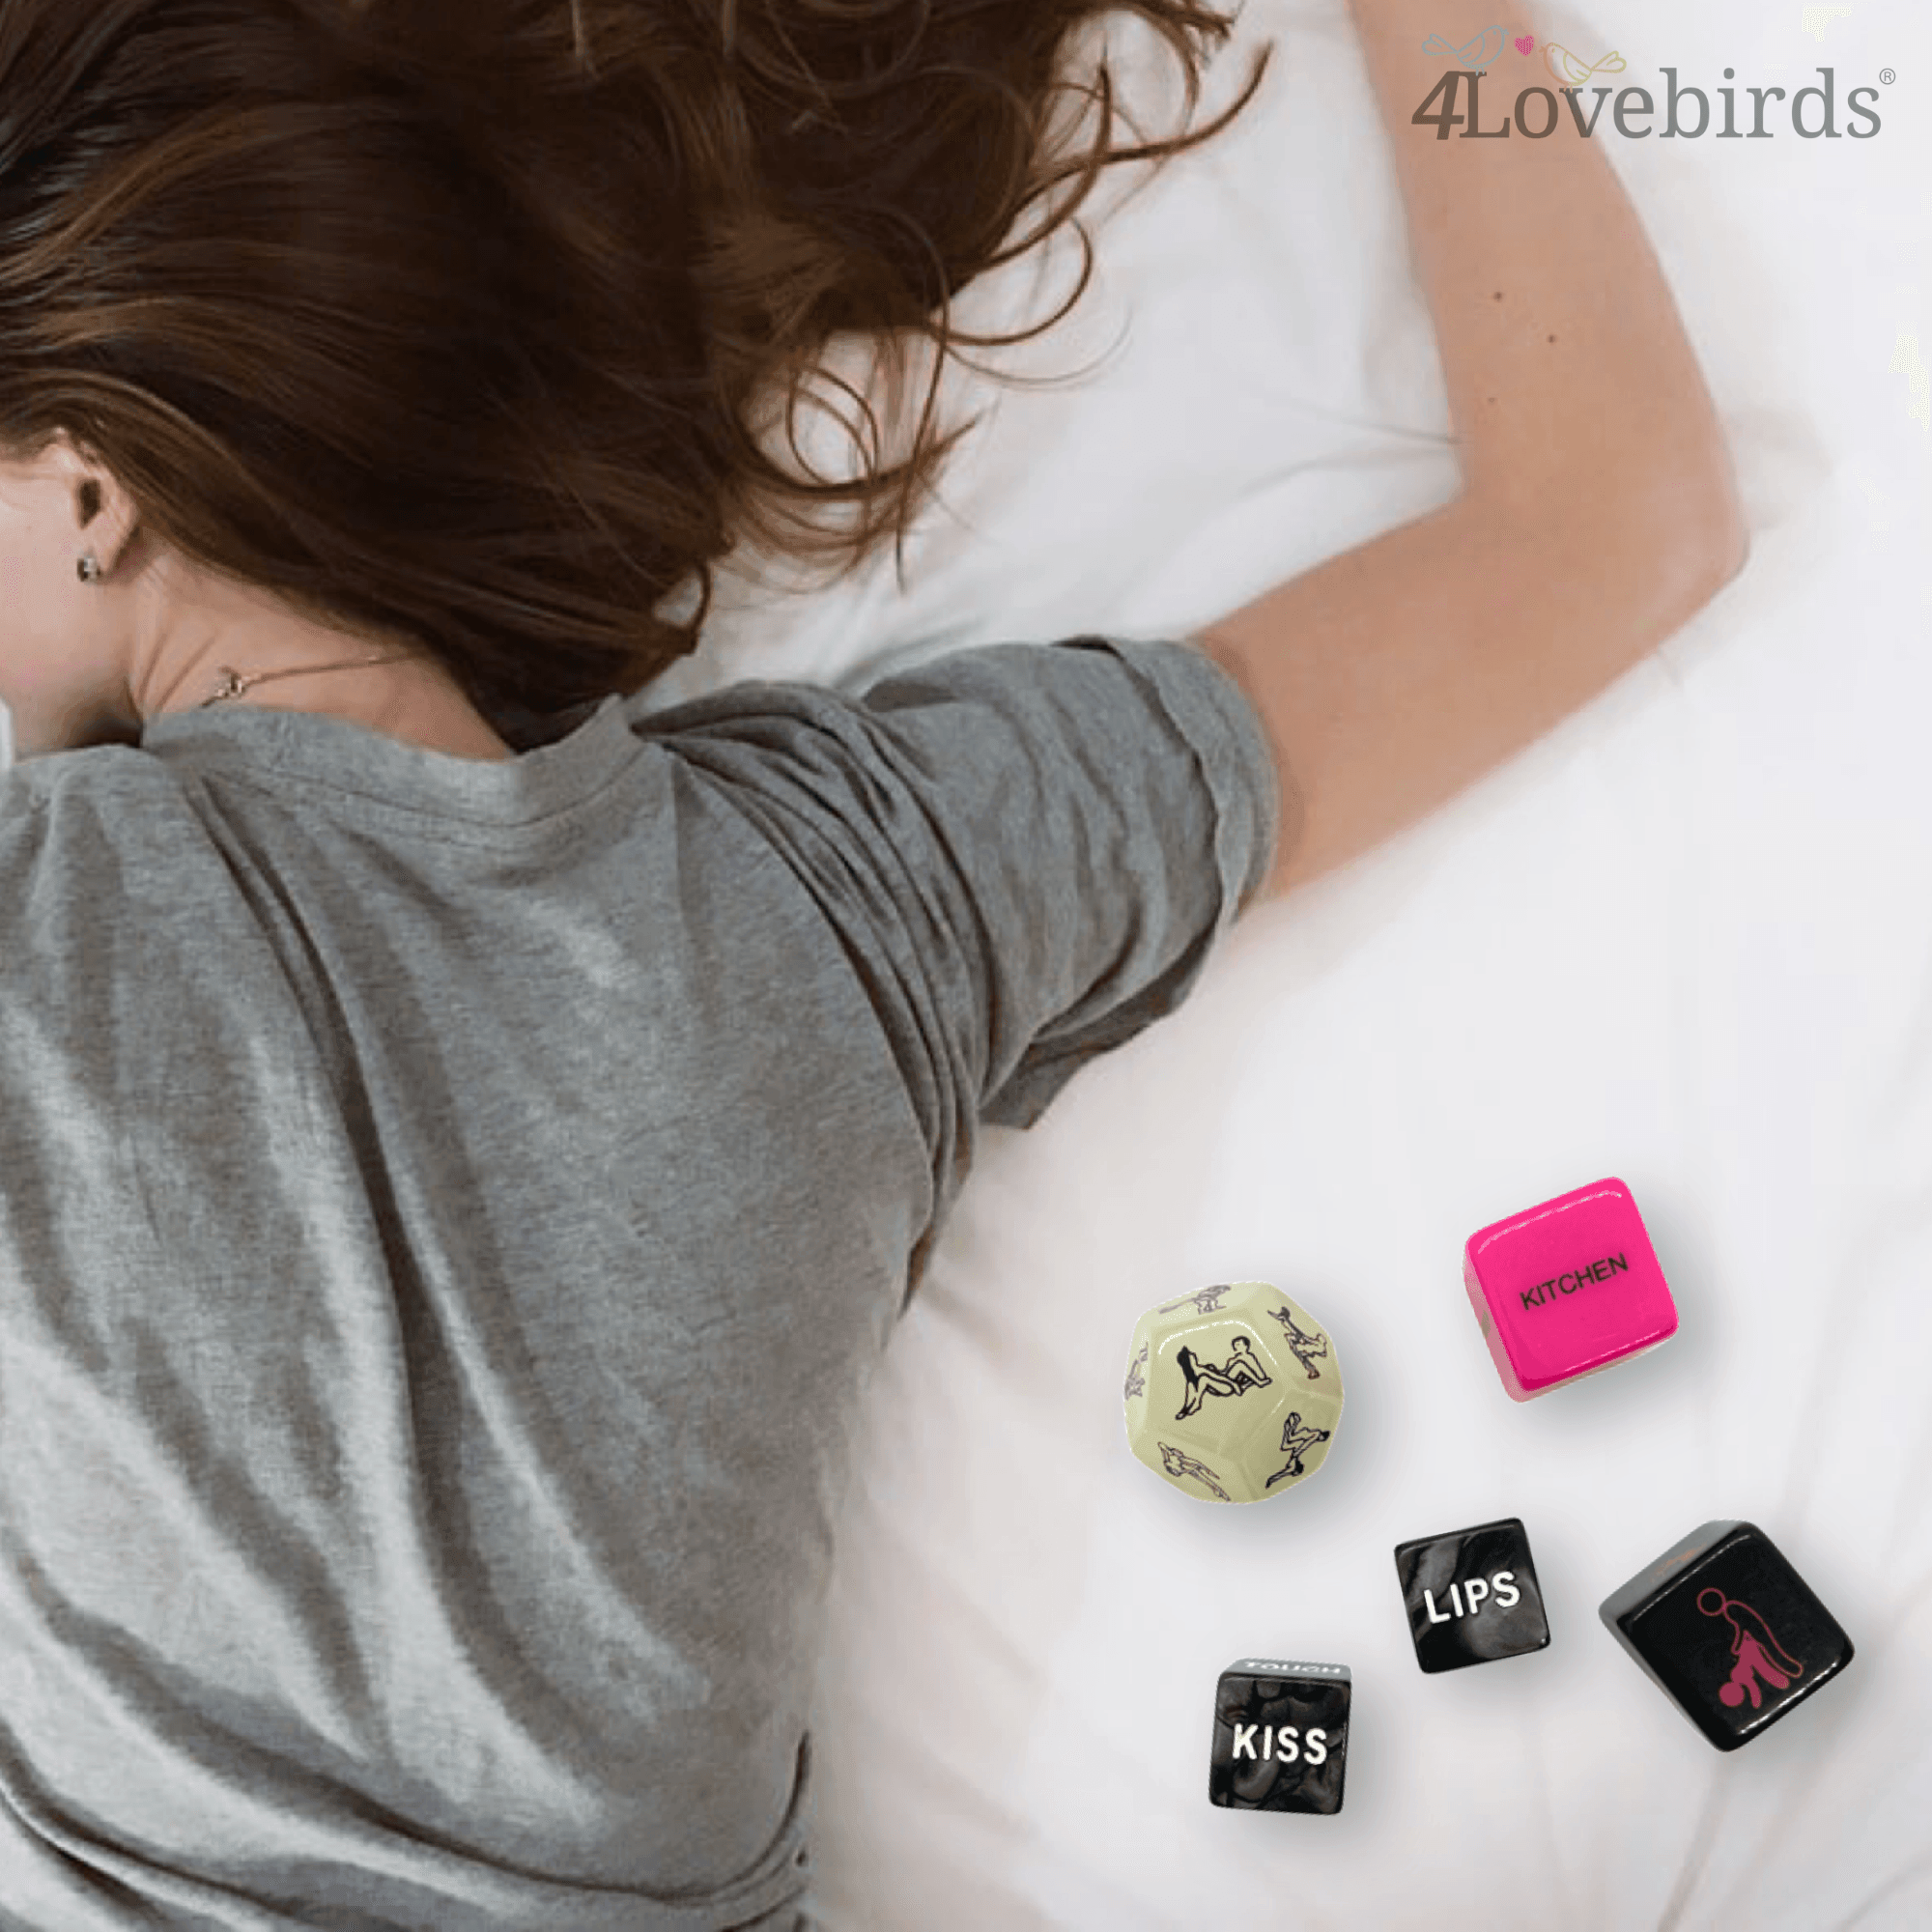 Sex Dice, sex positions, fun in the bedroom, bedroom game, fun game, h pic